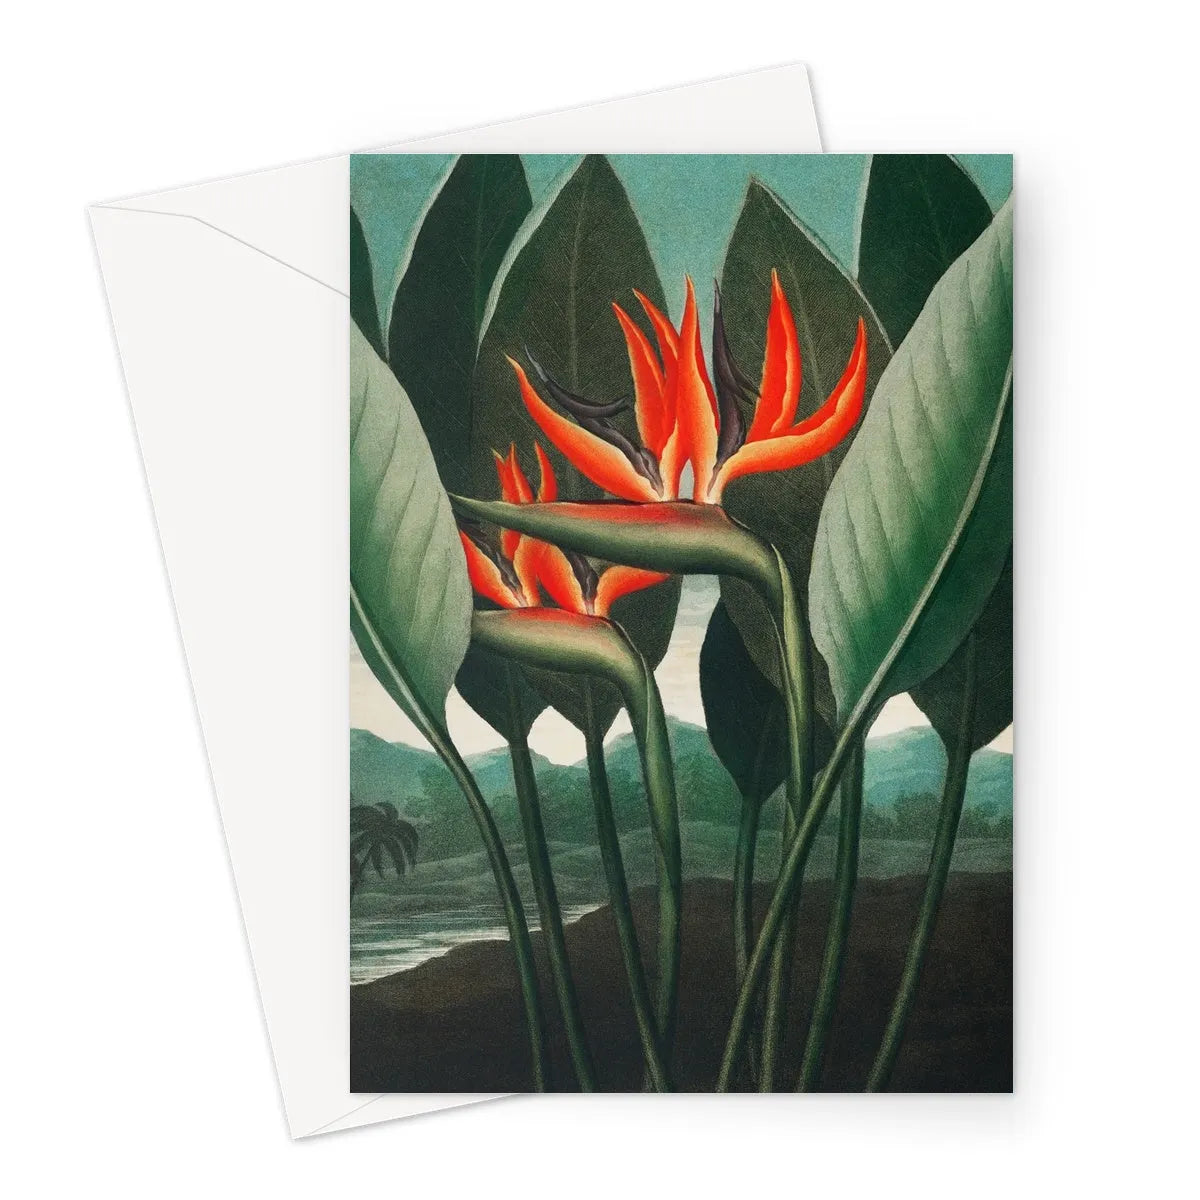 Queen Plant By Robert John Thornton Greeting Card - A5 Portrait / 1 Card - Greeting & Note Cards - Aesthetic Art